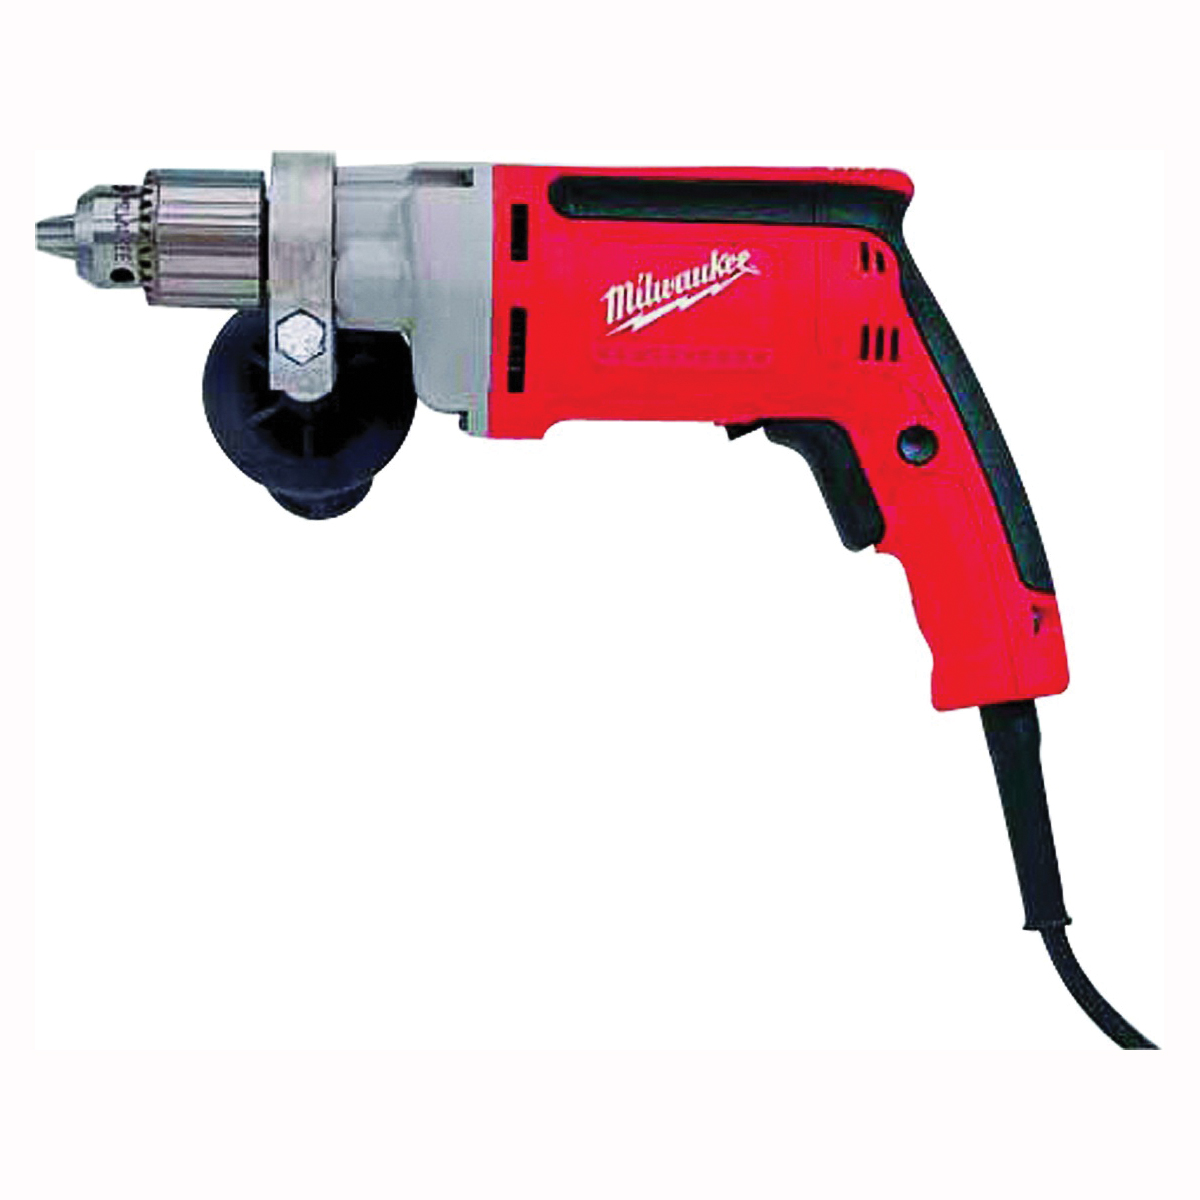 0300-20 Electric Drill, 8 A, 1/2 in Chuck, Keyed Chuck, 8 ft L Cord